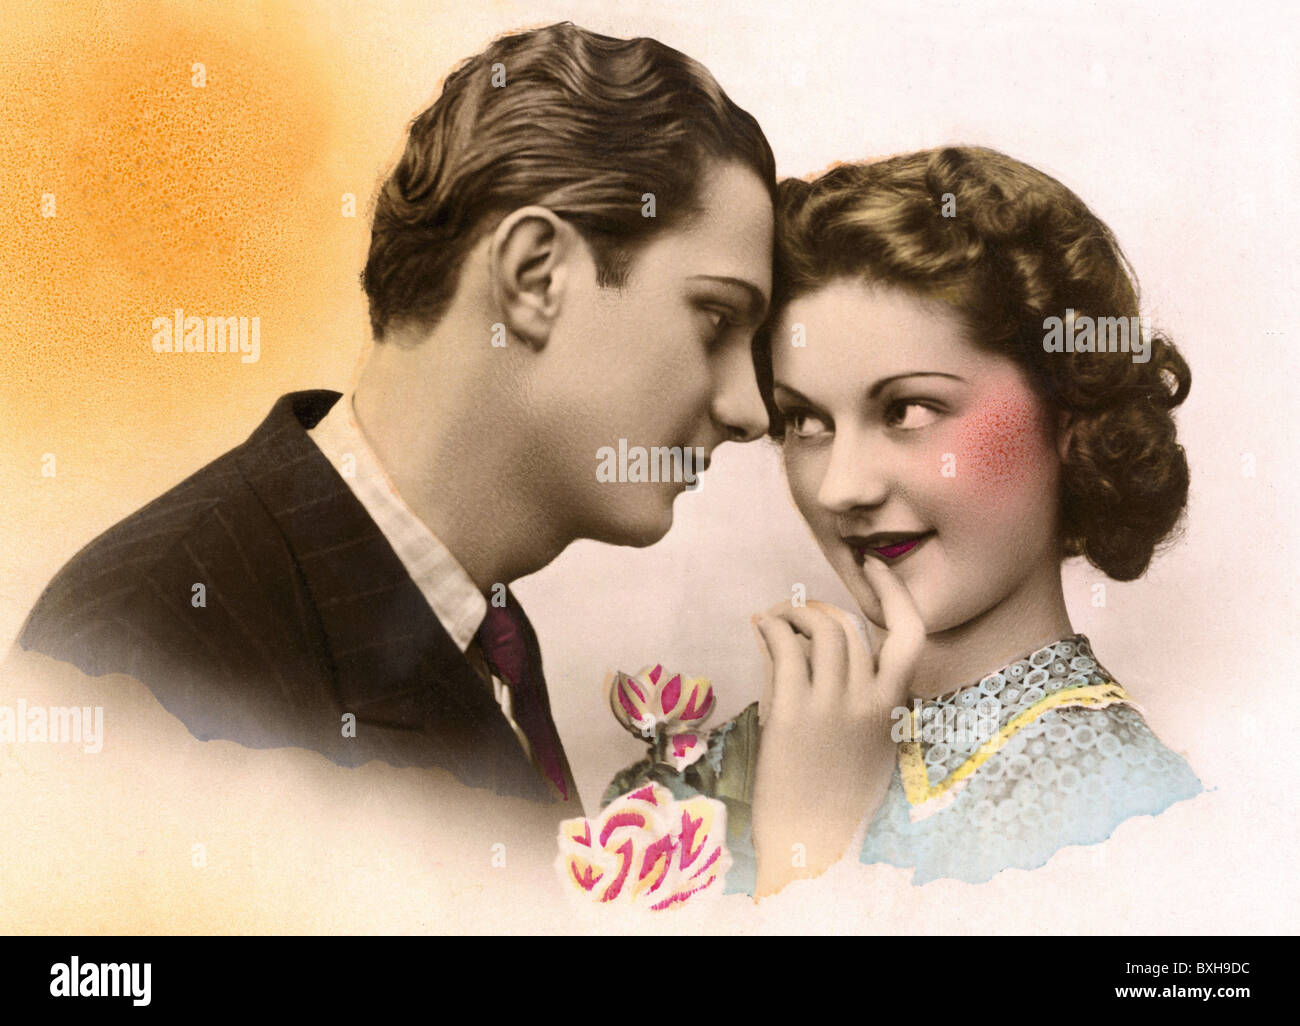 poeple, couples, love couple, France, 1942, Additional-Rights-Clearences-Not Available Stock Photo